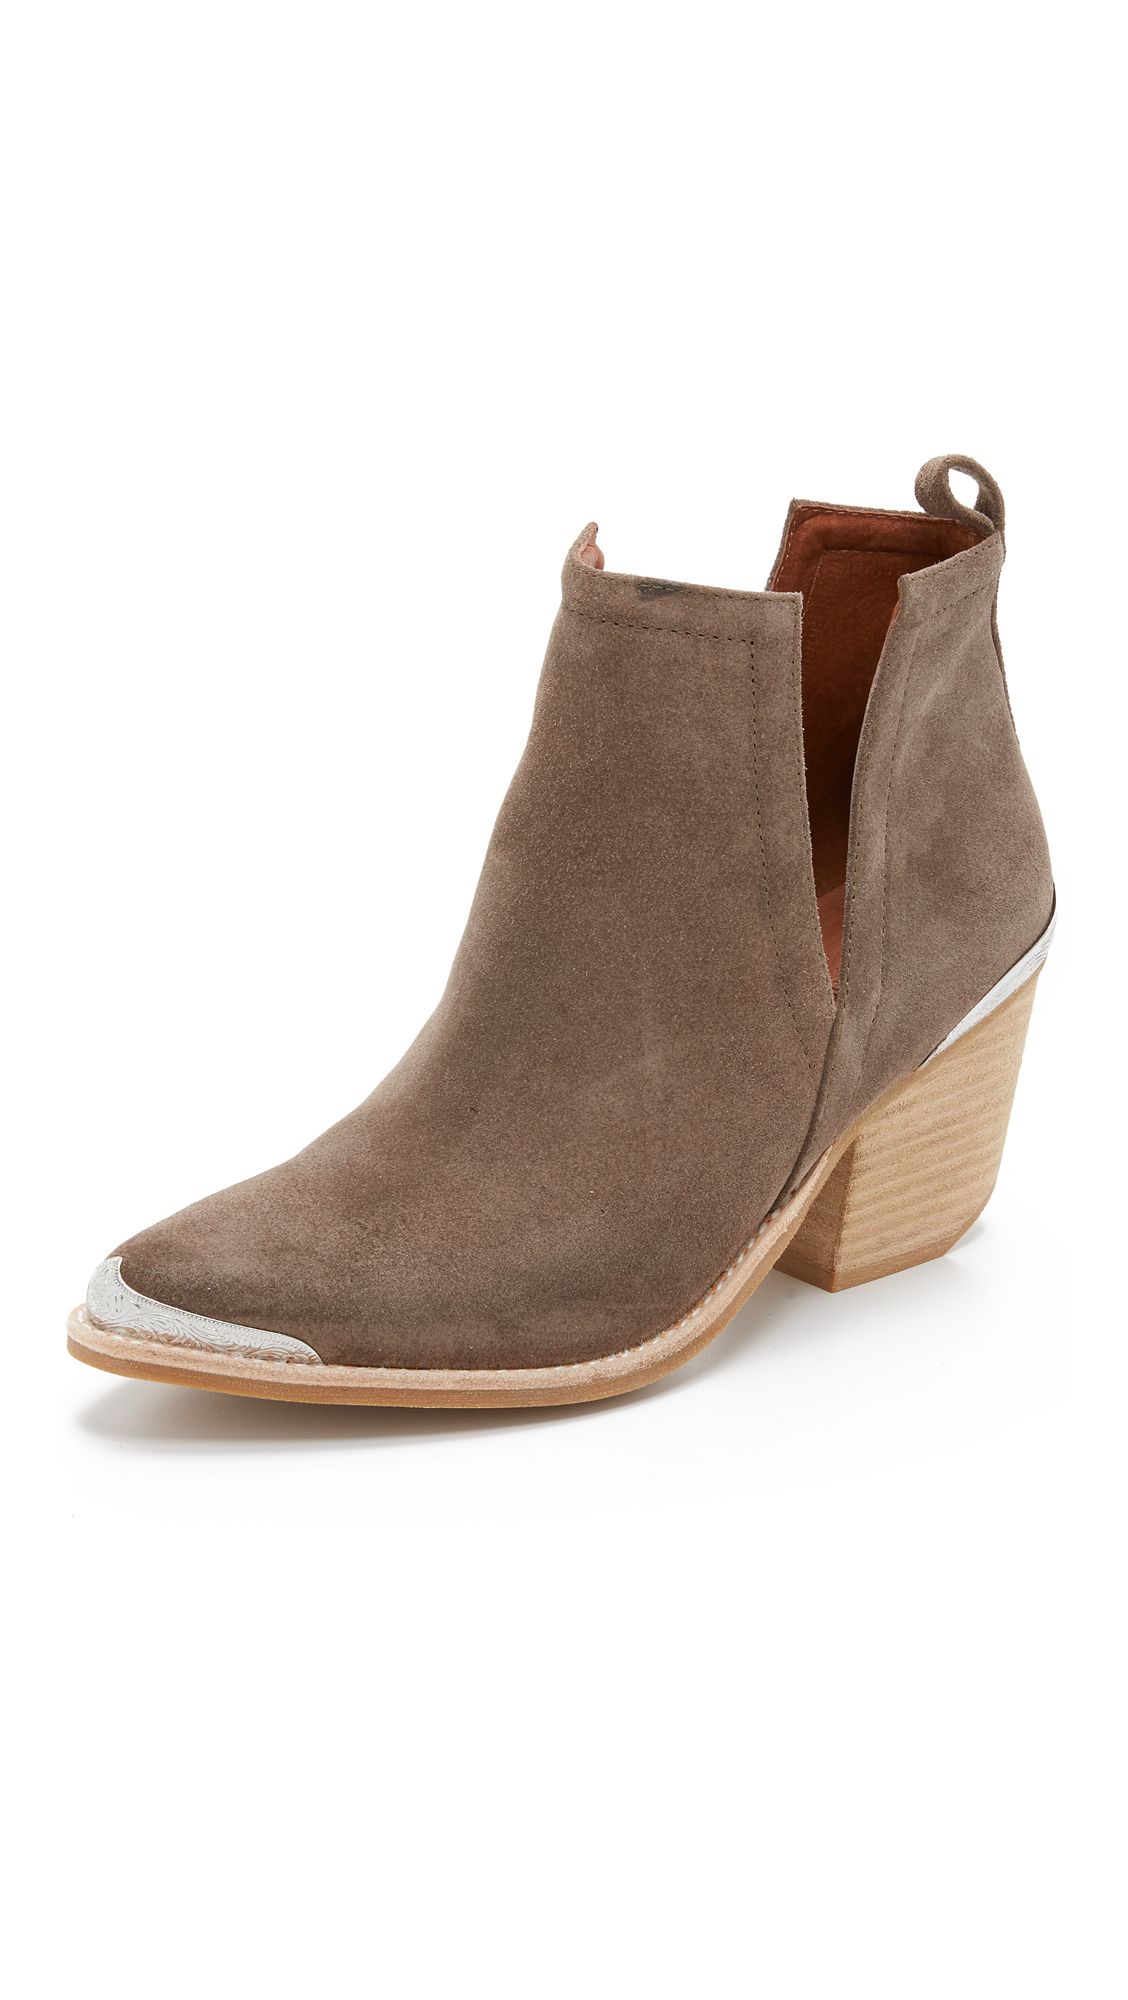 Cromwell Suede Booties | Shopbop